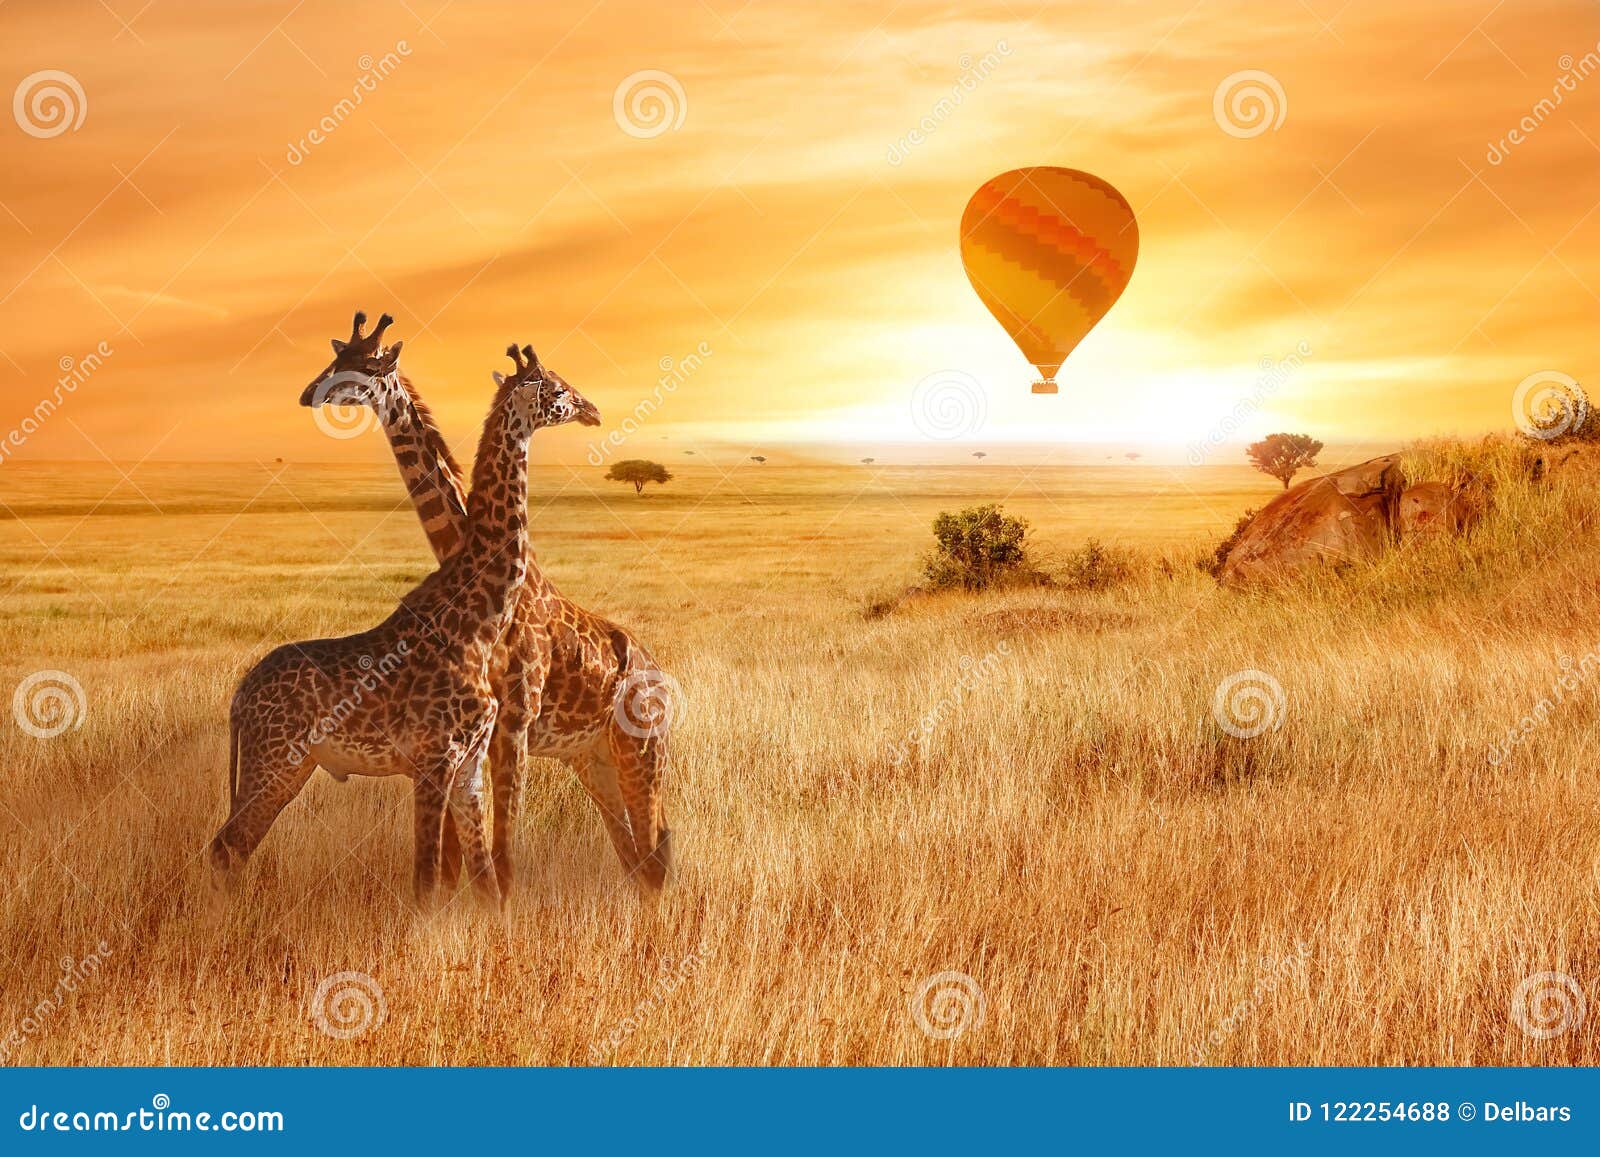 giraffes in the african savanna against the background of the orange sunset. flight of a balloon in the sky above the savanna. afr